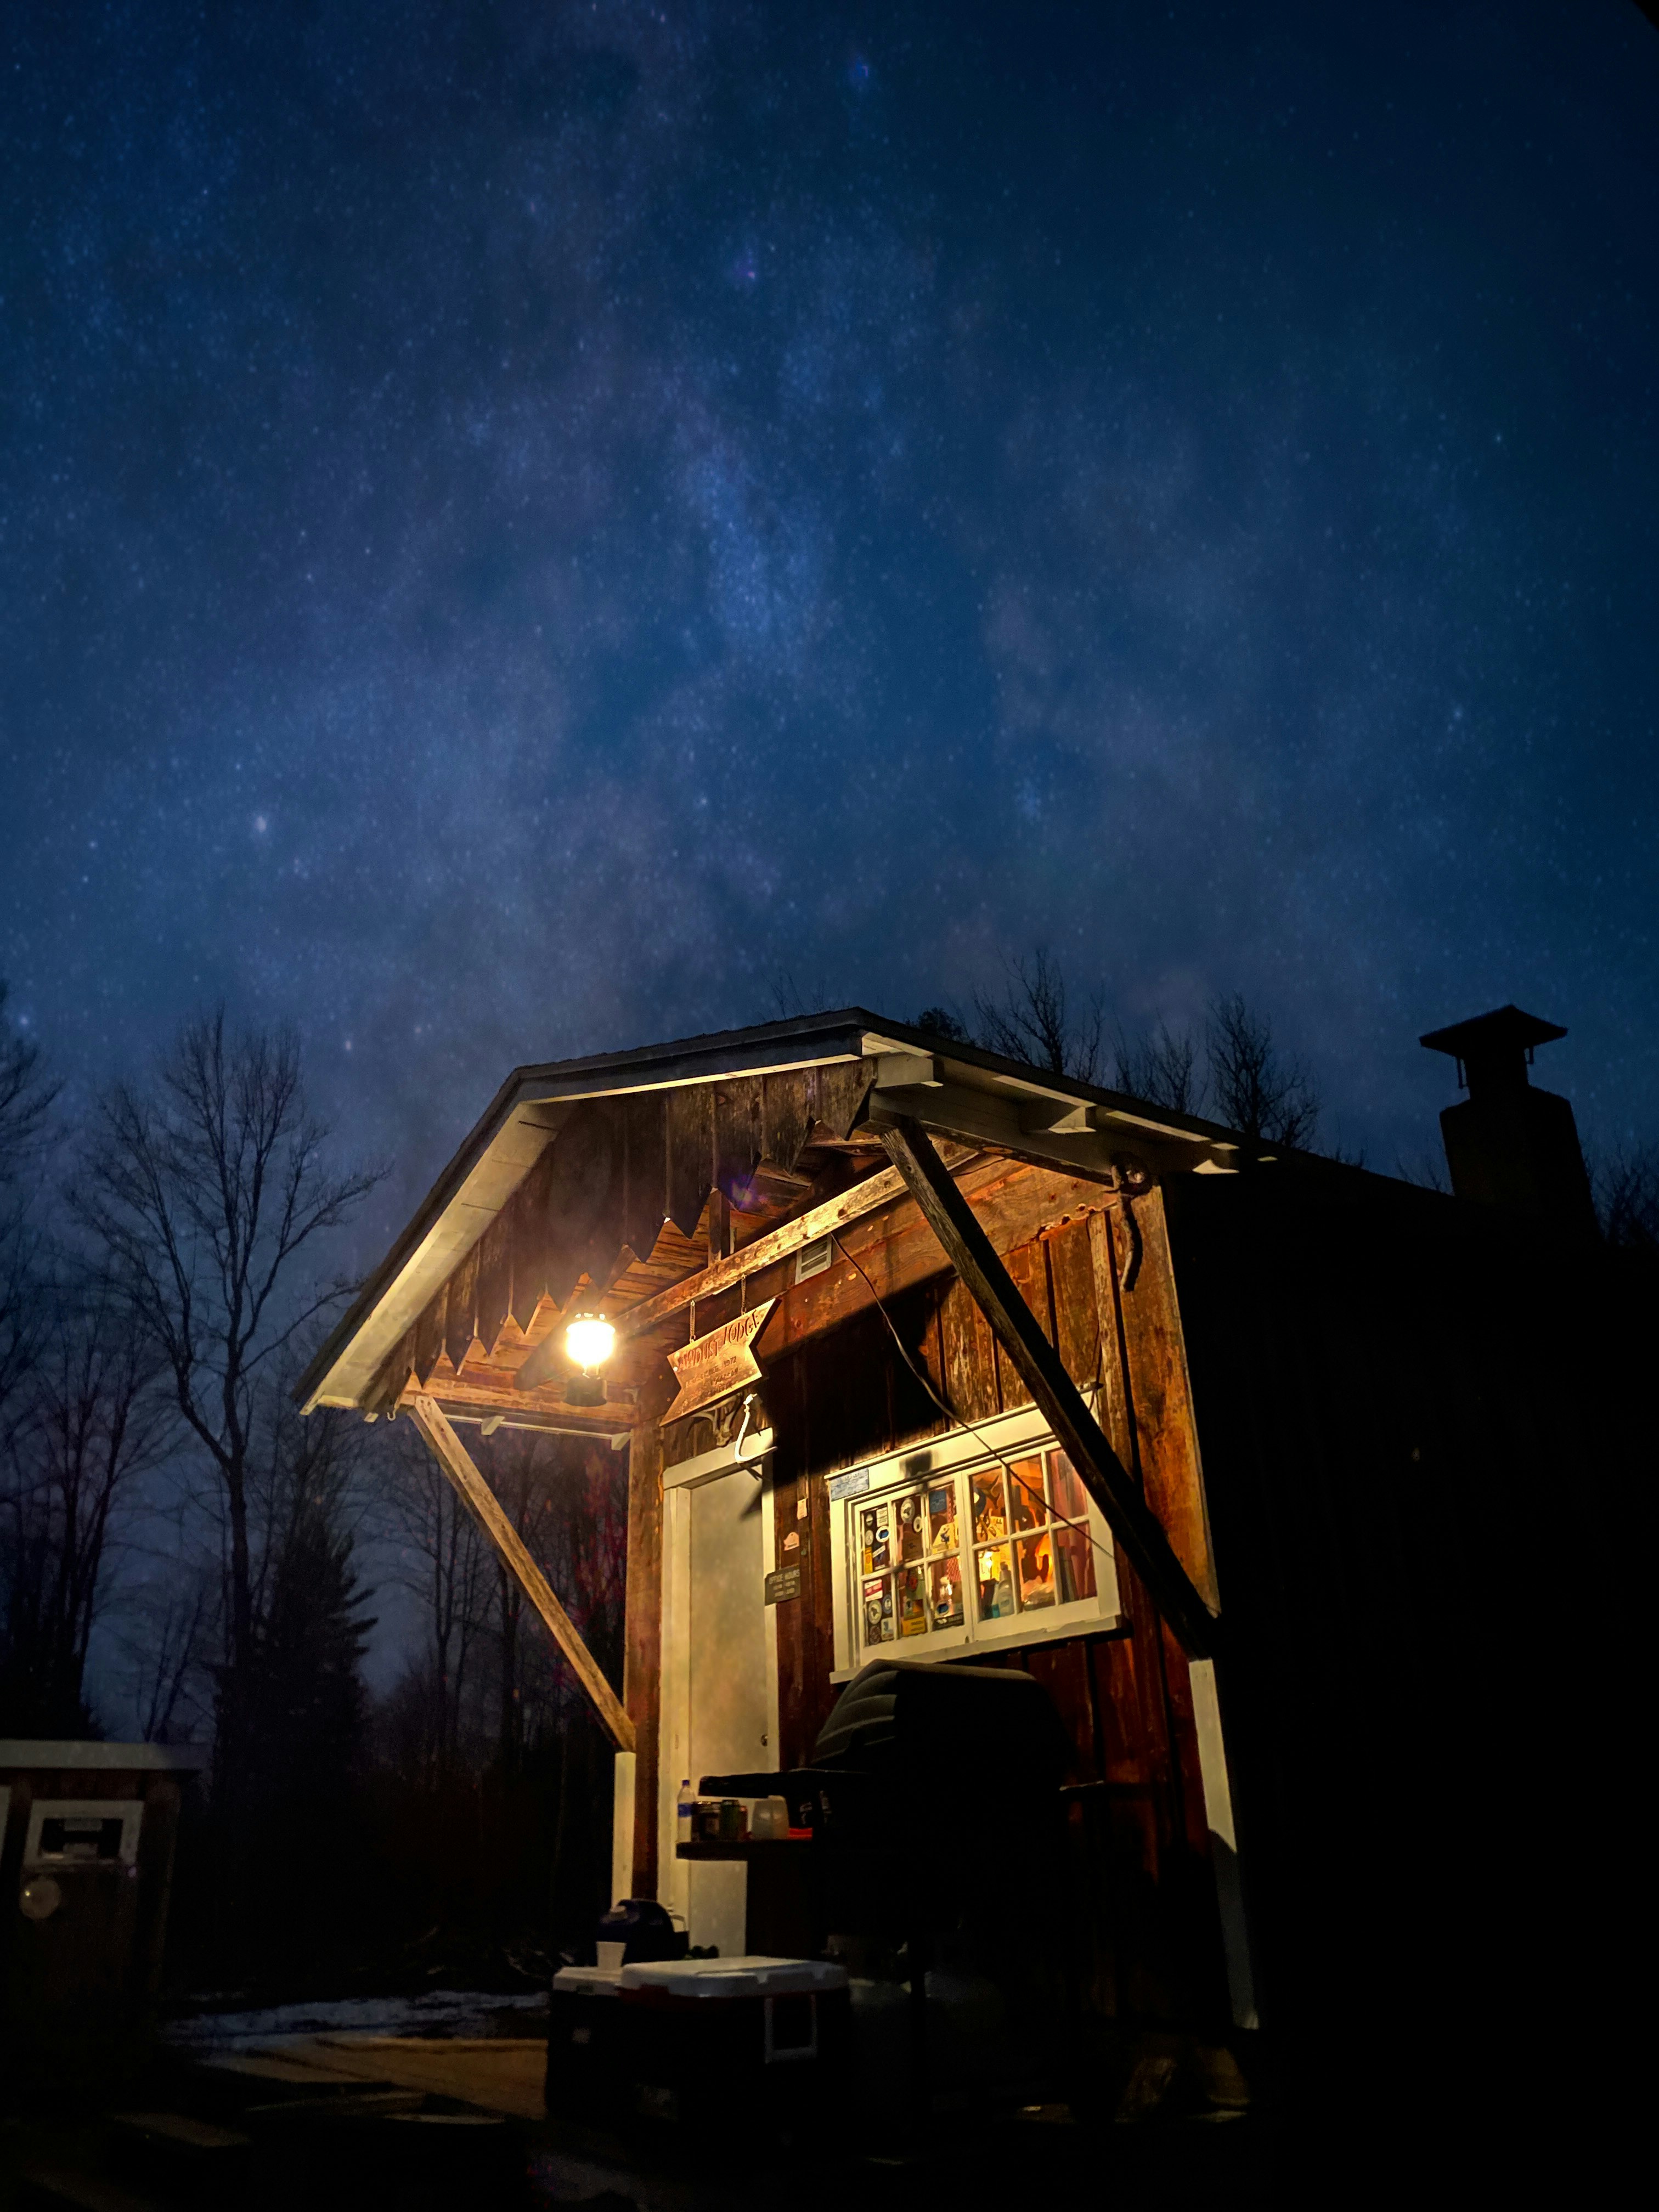 brown wooden house under blue sky during night time